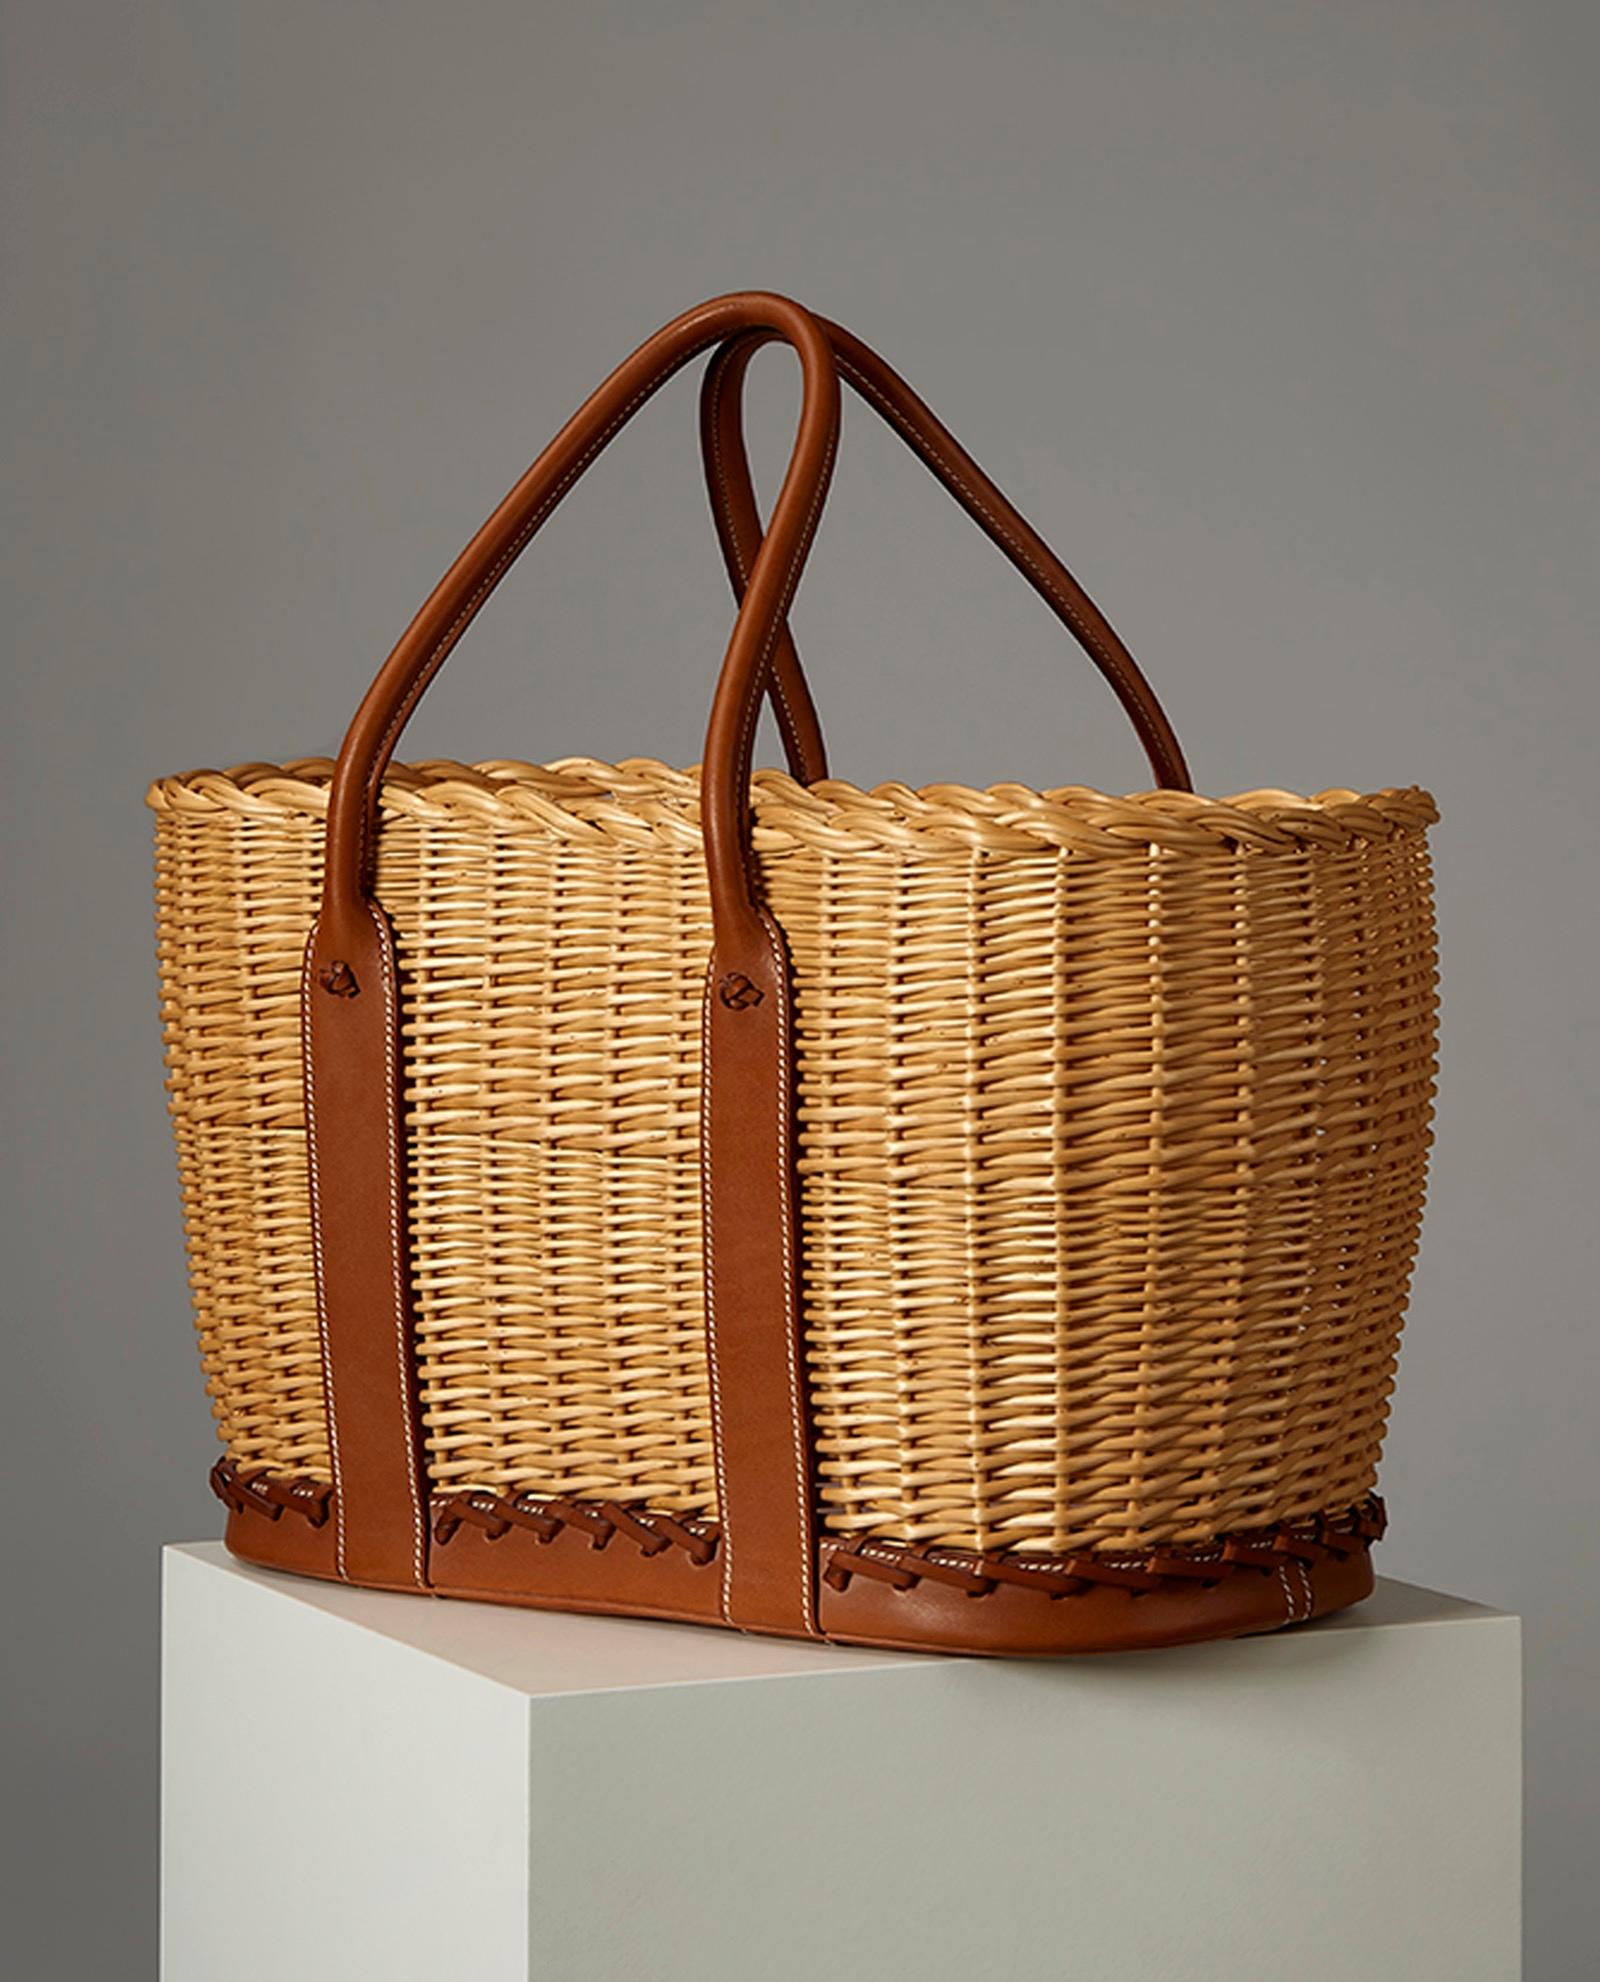 Hermes picnic basket barenia osier bag . 
Crafted from a combination of Osier Ratan Wicker and Barenia leather, This limited edition basket features contrast white stitching throughout. The light brown color of the wicker compliments the dark brown